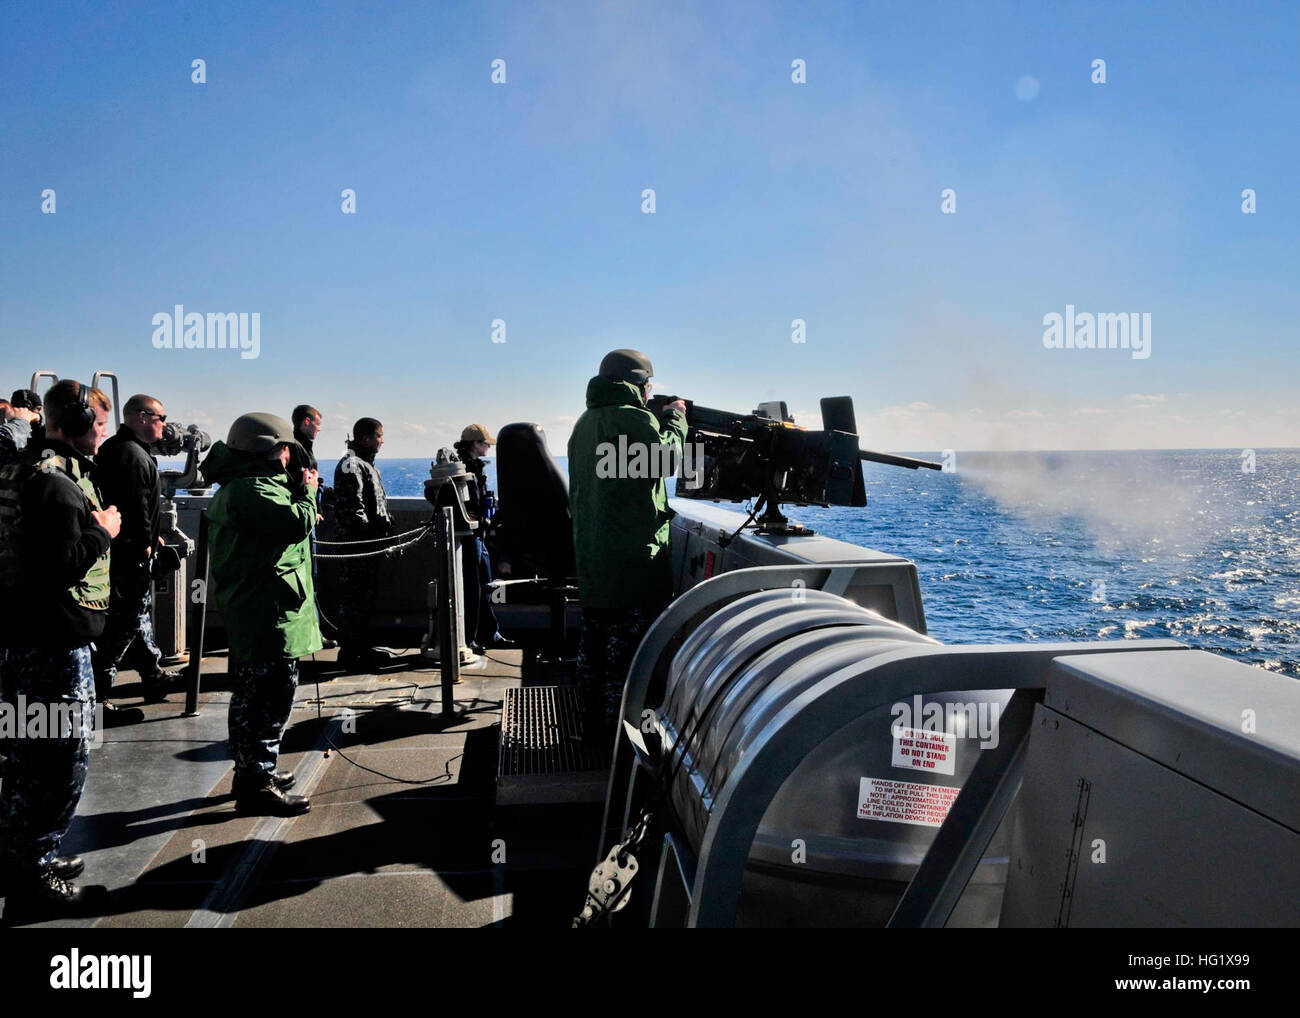 Information Systems Technician 2nd Class Justin Stone, from Kingsport, Tenn., fires an M2HB .50-caliber machine gun aboard the amphibious transport dock ship USS New York (LPD 21). (U.S. Navy photo by Mass Communication Specialist 2nd Class Cyrus Roson/Released) USS New York live-fire exercise 140122-N-YO707-312 Stock Photo